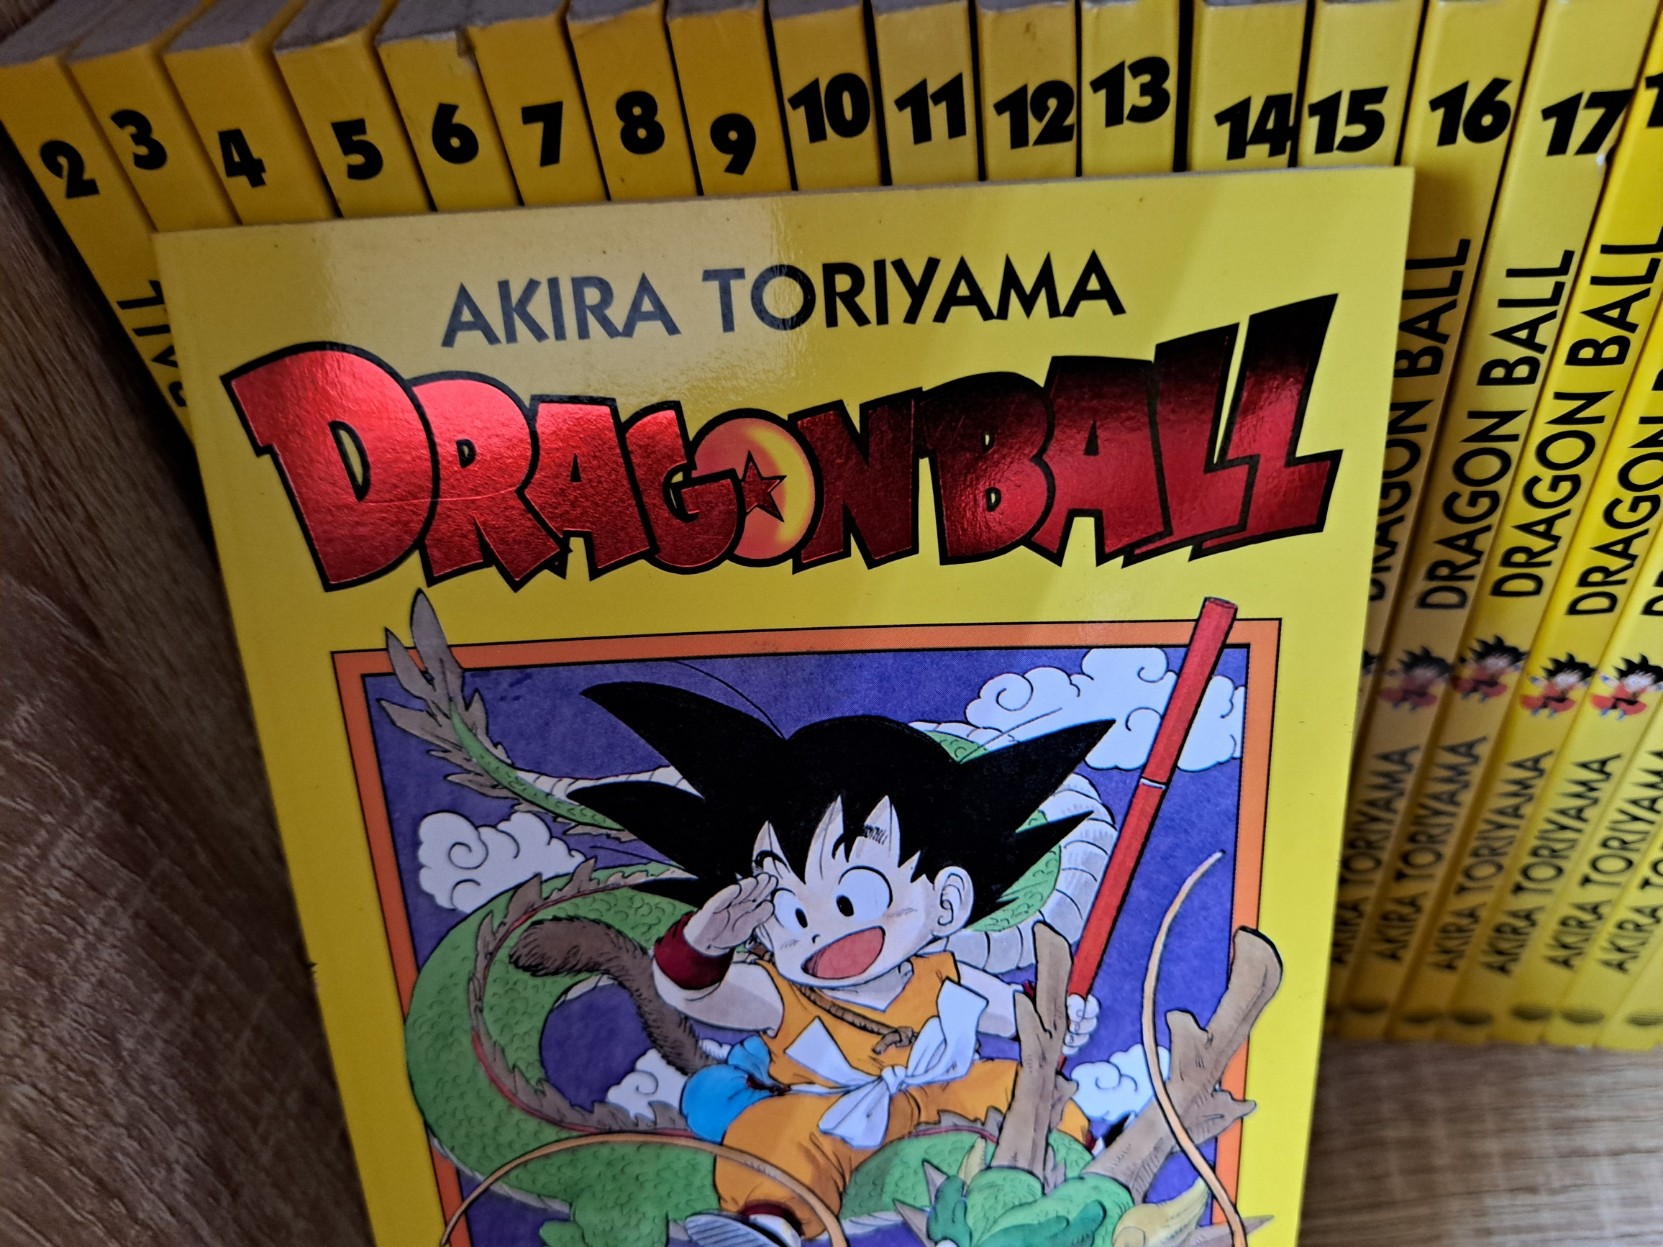 A picture of Akira Toriyama's most famous work, Dragon Ball. The first book cover is shown, in front of the spines to the rest of it (numbers 2 to 23 visible).